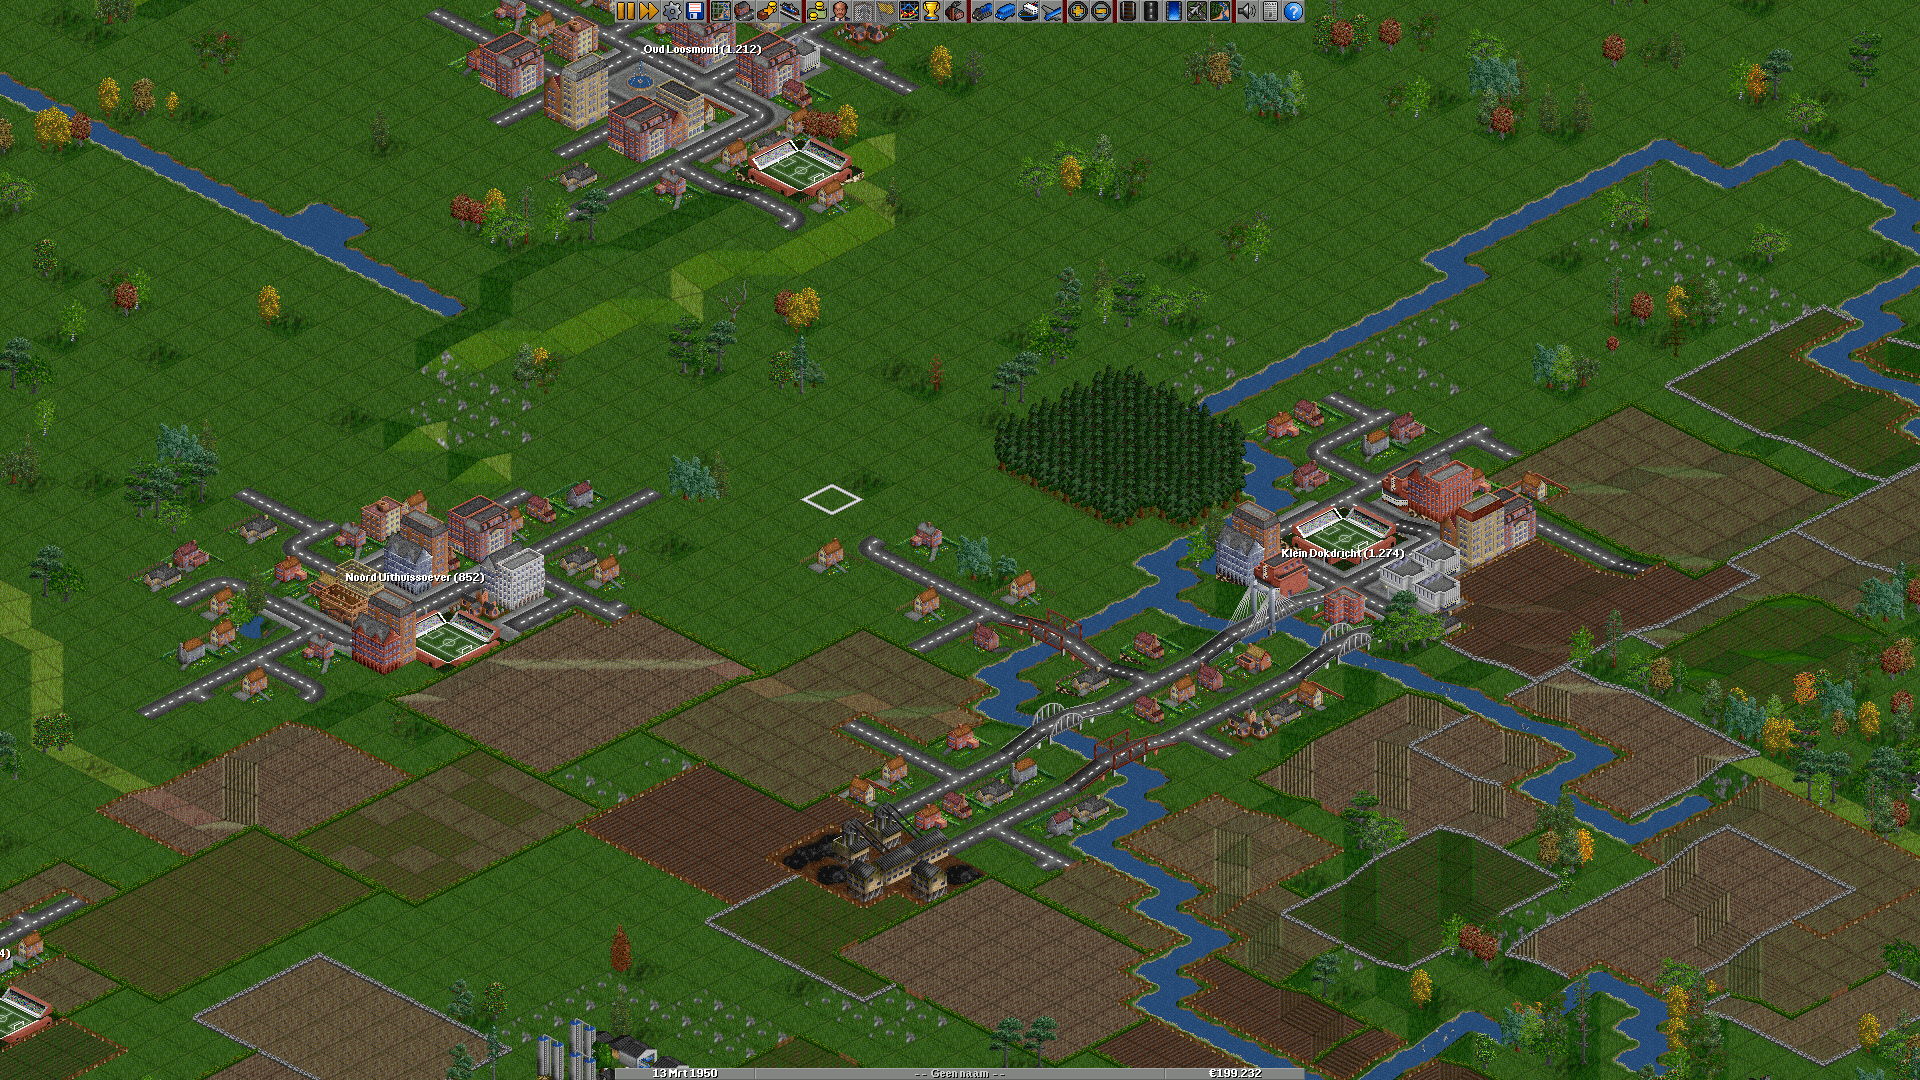 Camping tycoon. Open transport Tycoon Deluxe. Transport Tycoon (1995). Transport Tycoon 2050. Transport Tycoon Deluxe 2022.